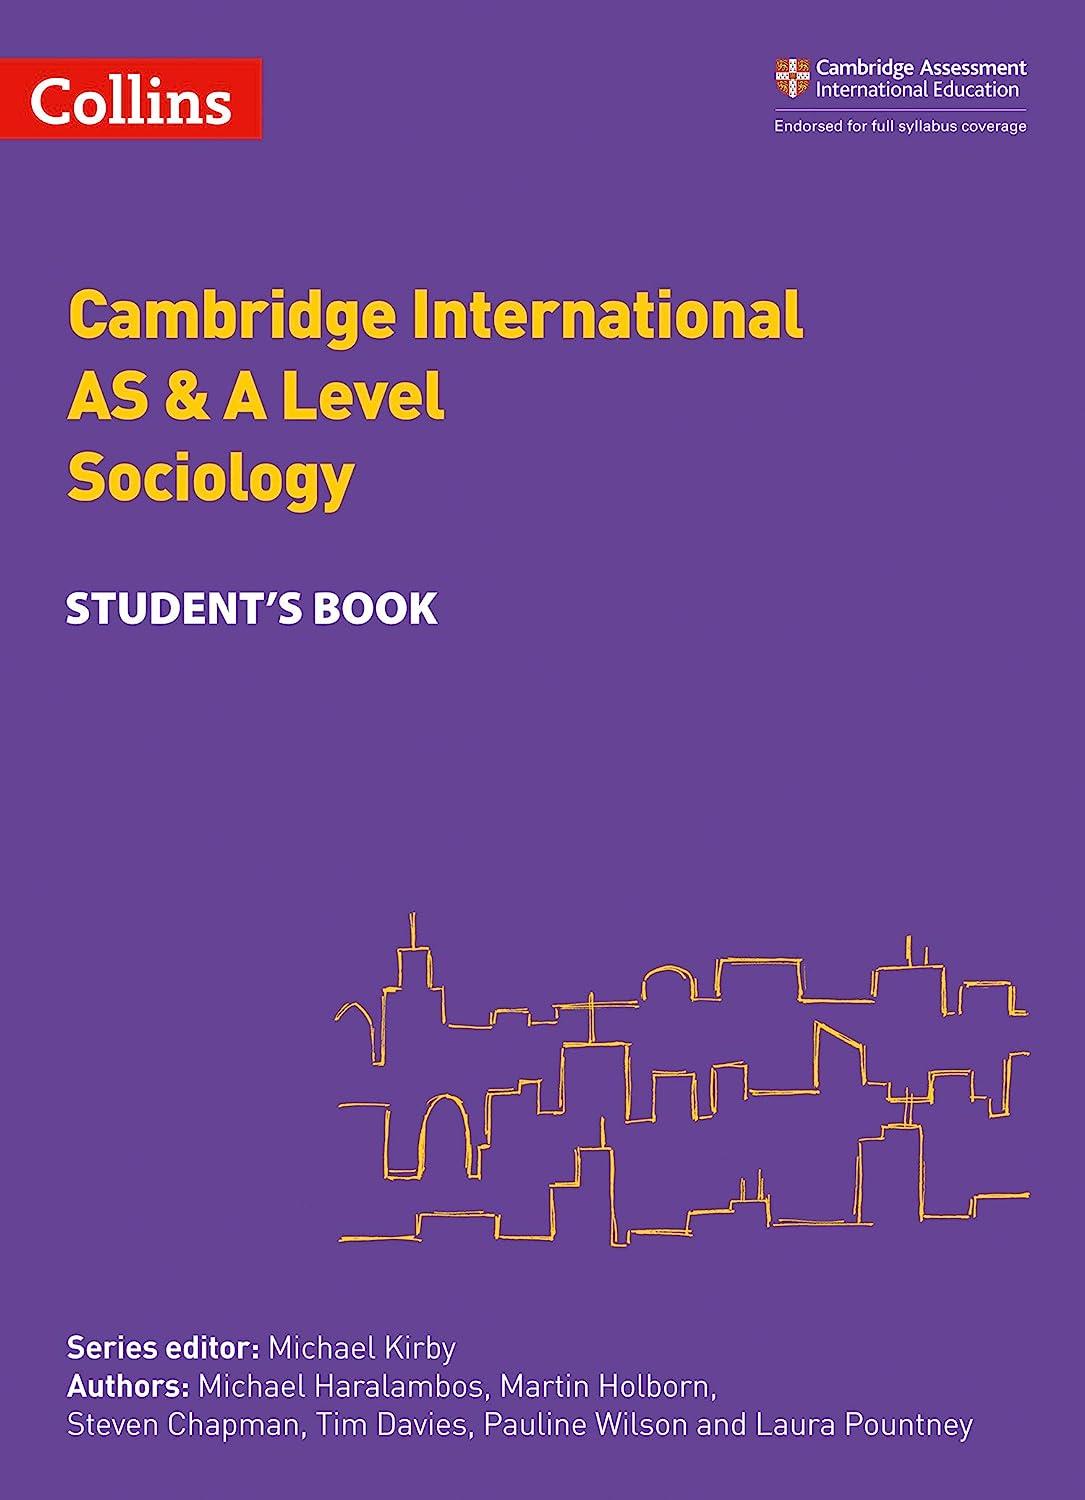 cambridge international as and a level sociology student book 1st edition michael haralambos, martin holborn,